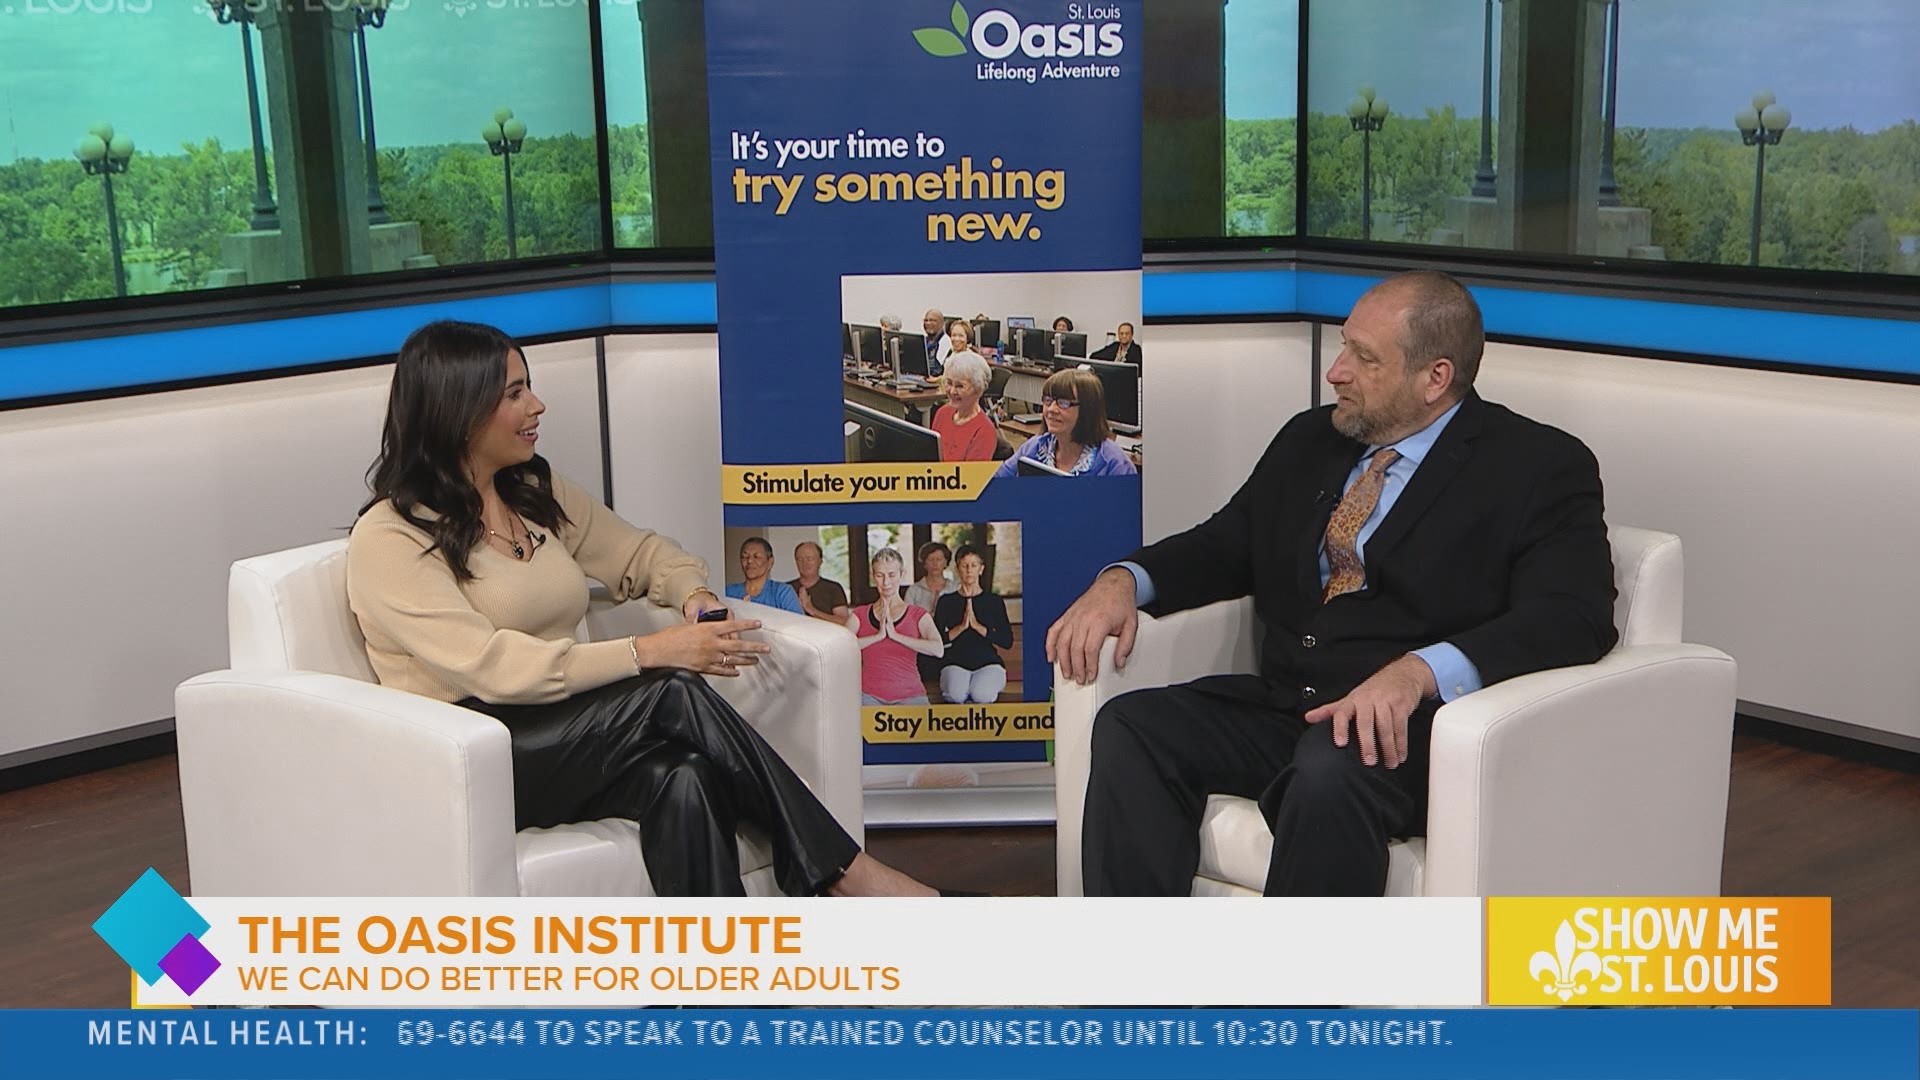 The Oasis is a nonprofit based in St. Louis. The institute will host a panel at the history museum to expand efforts and celebrate its anniversary.